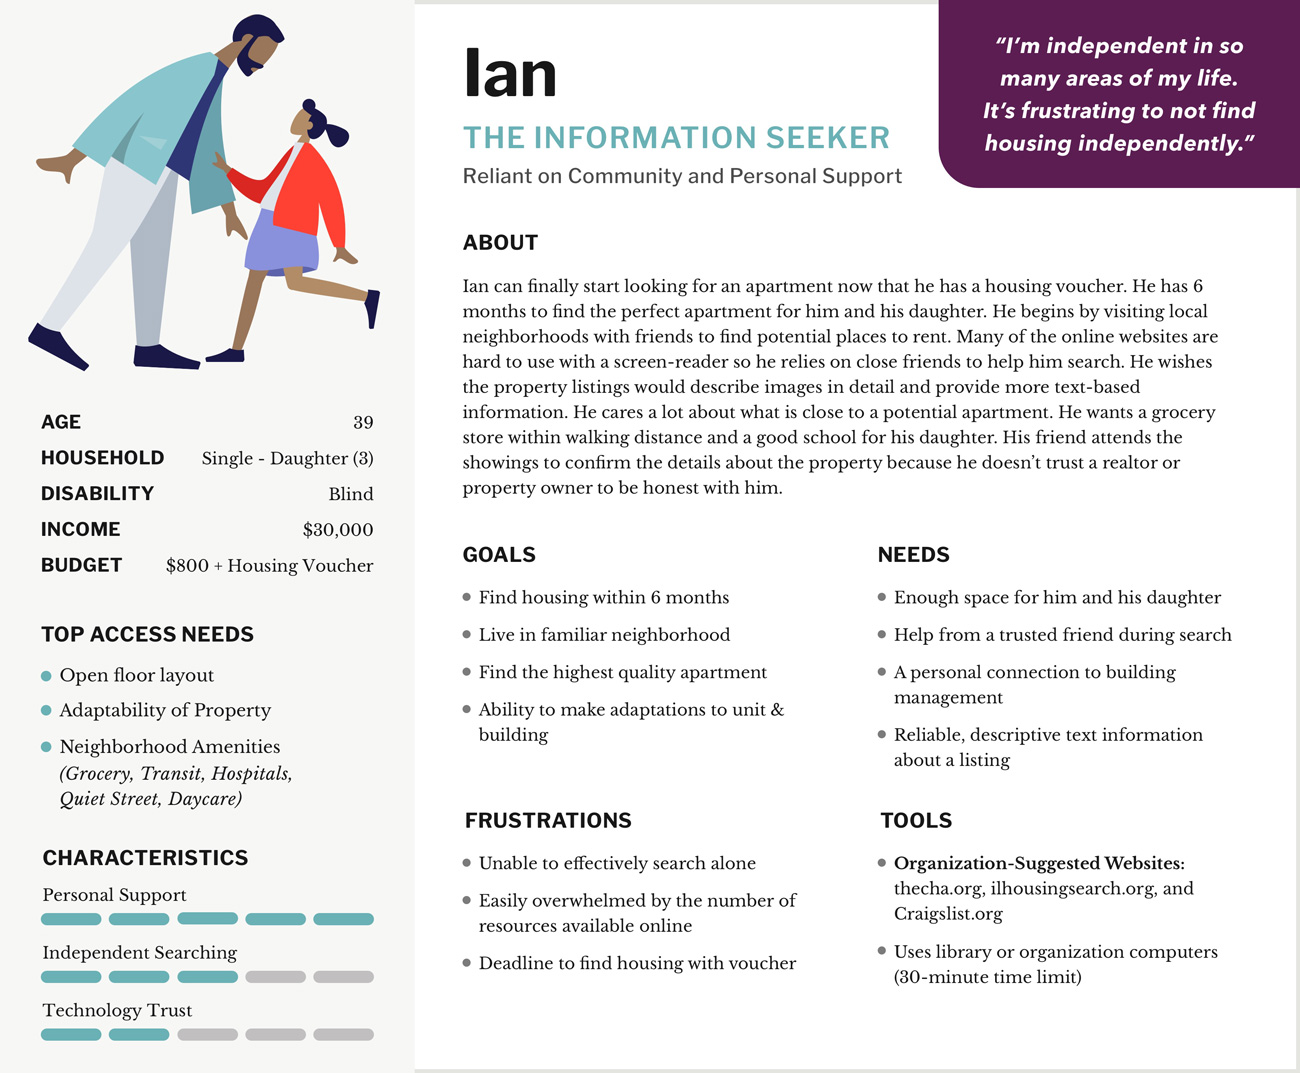 Persona for Ian the information seeker.